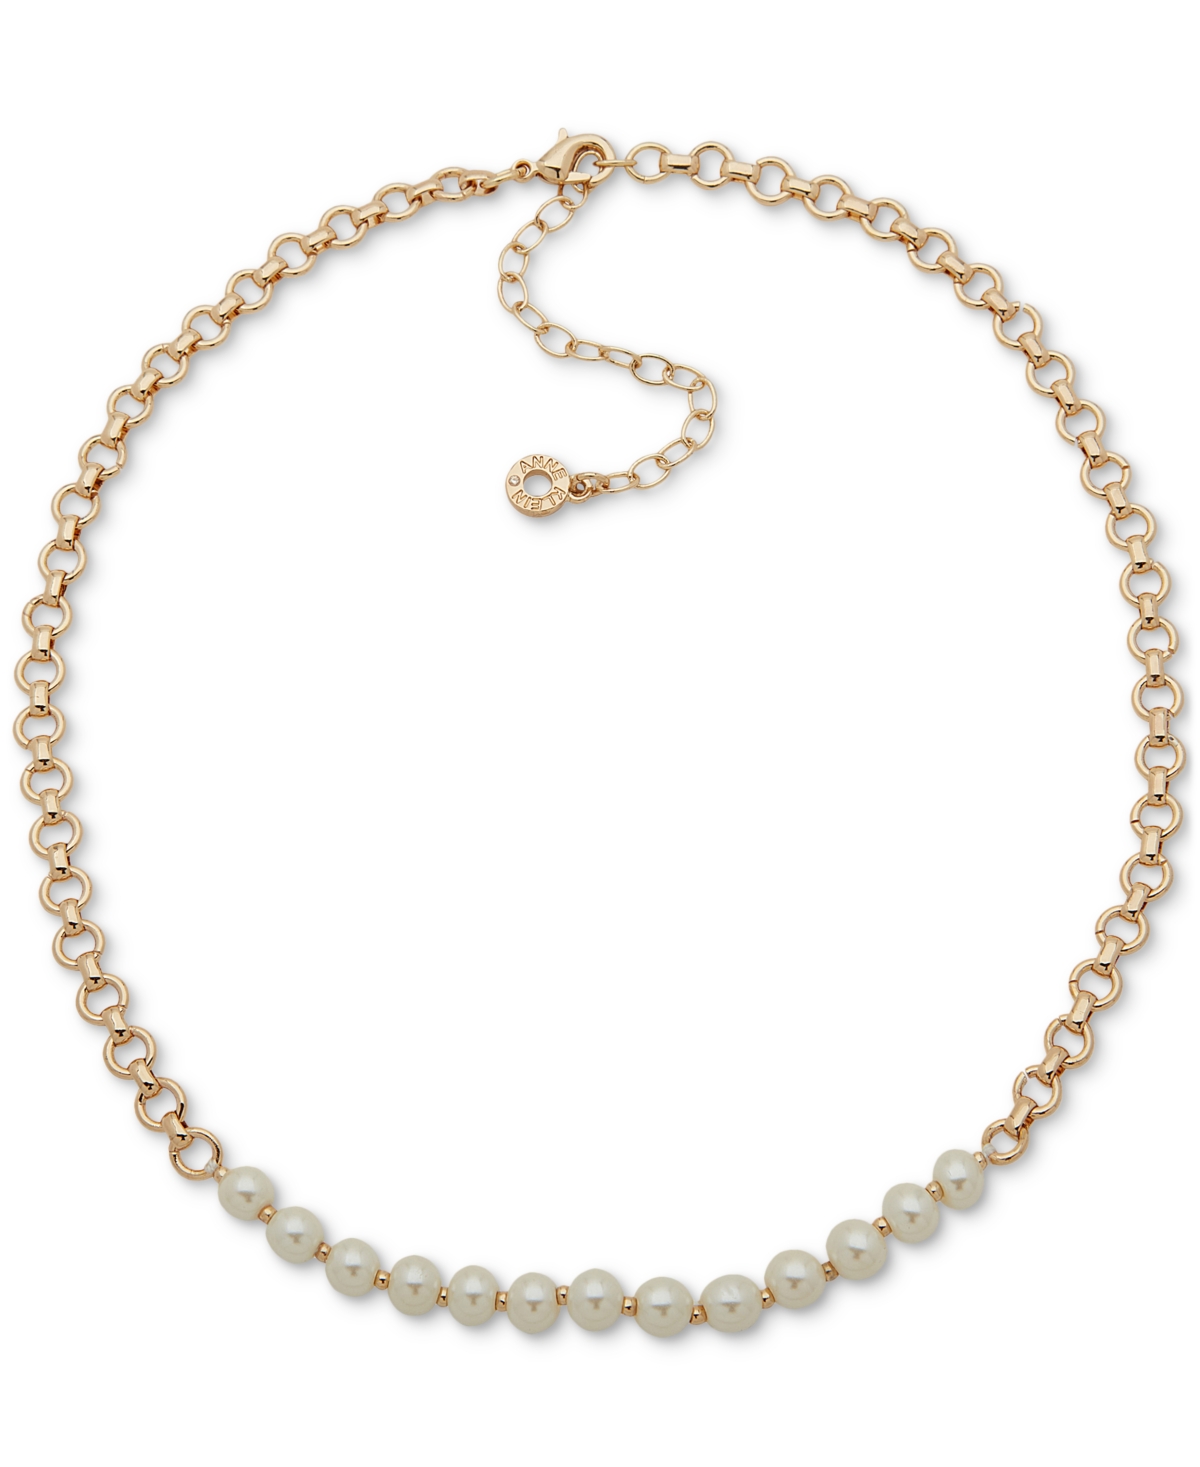 Gold-Tone Imitation Pearl Collar Necklace, 16" + 3" extender - Pearl